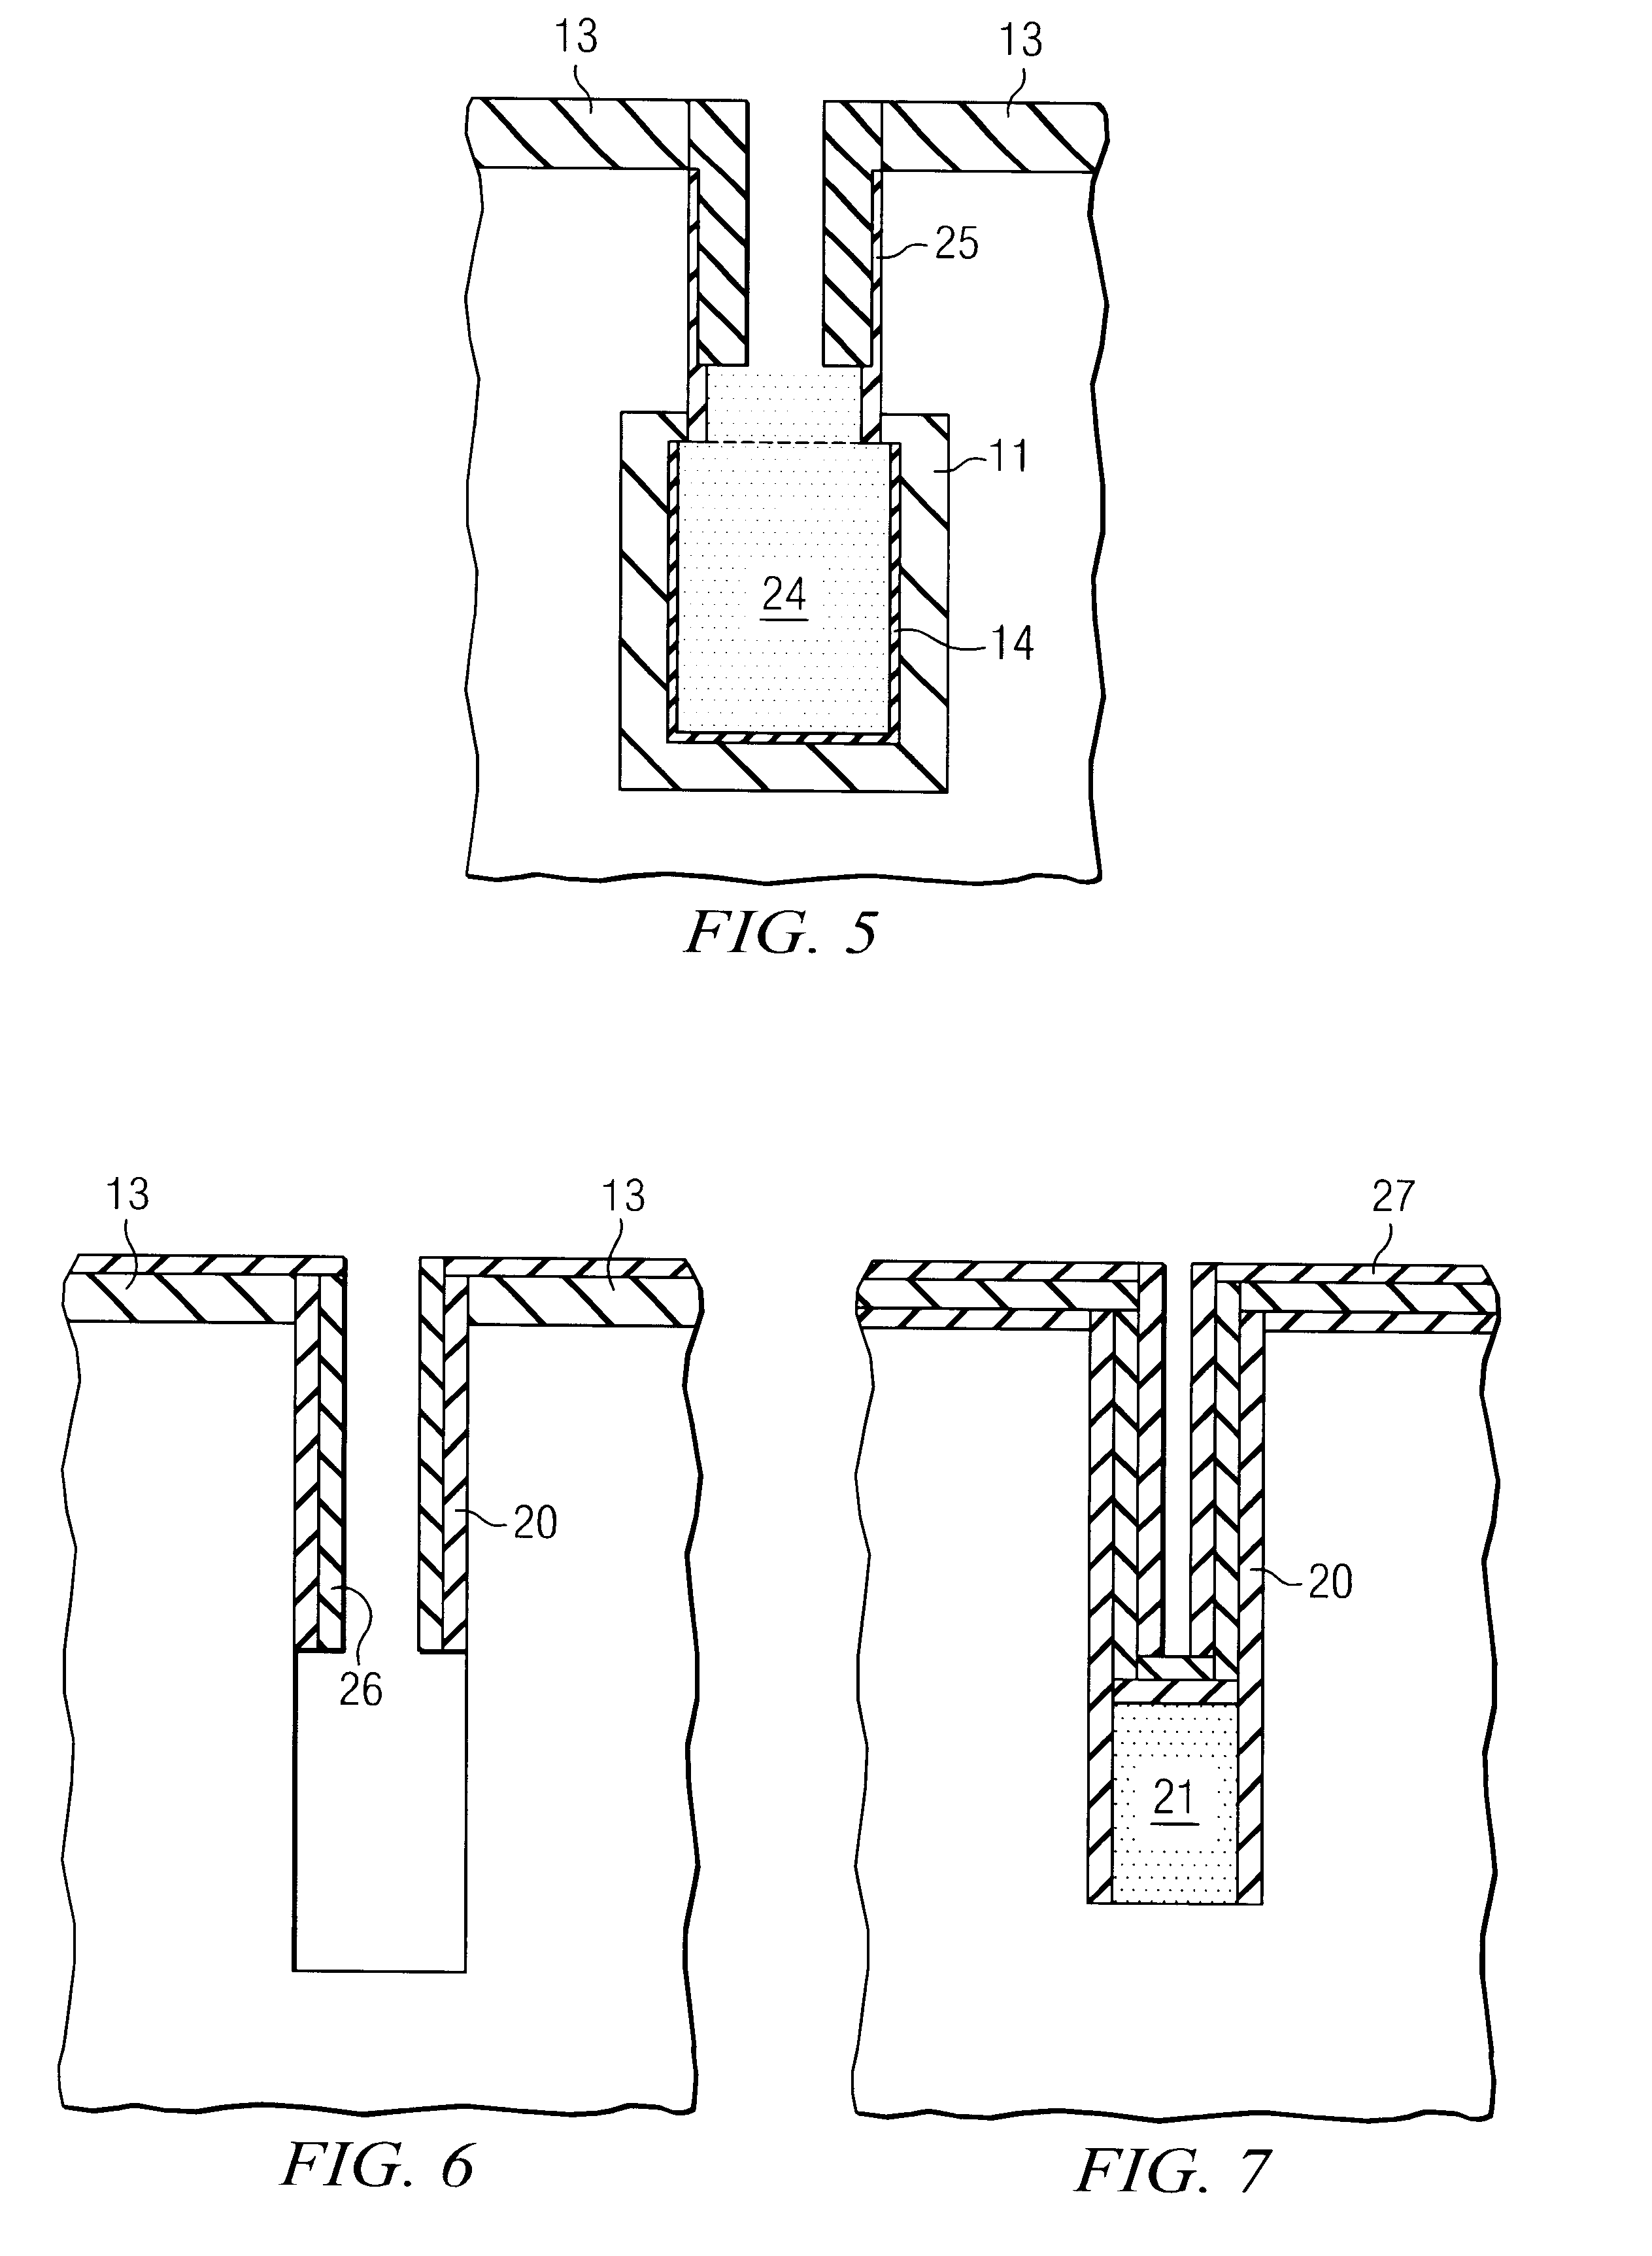 Process flow for two-step collar in DRAM preparation